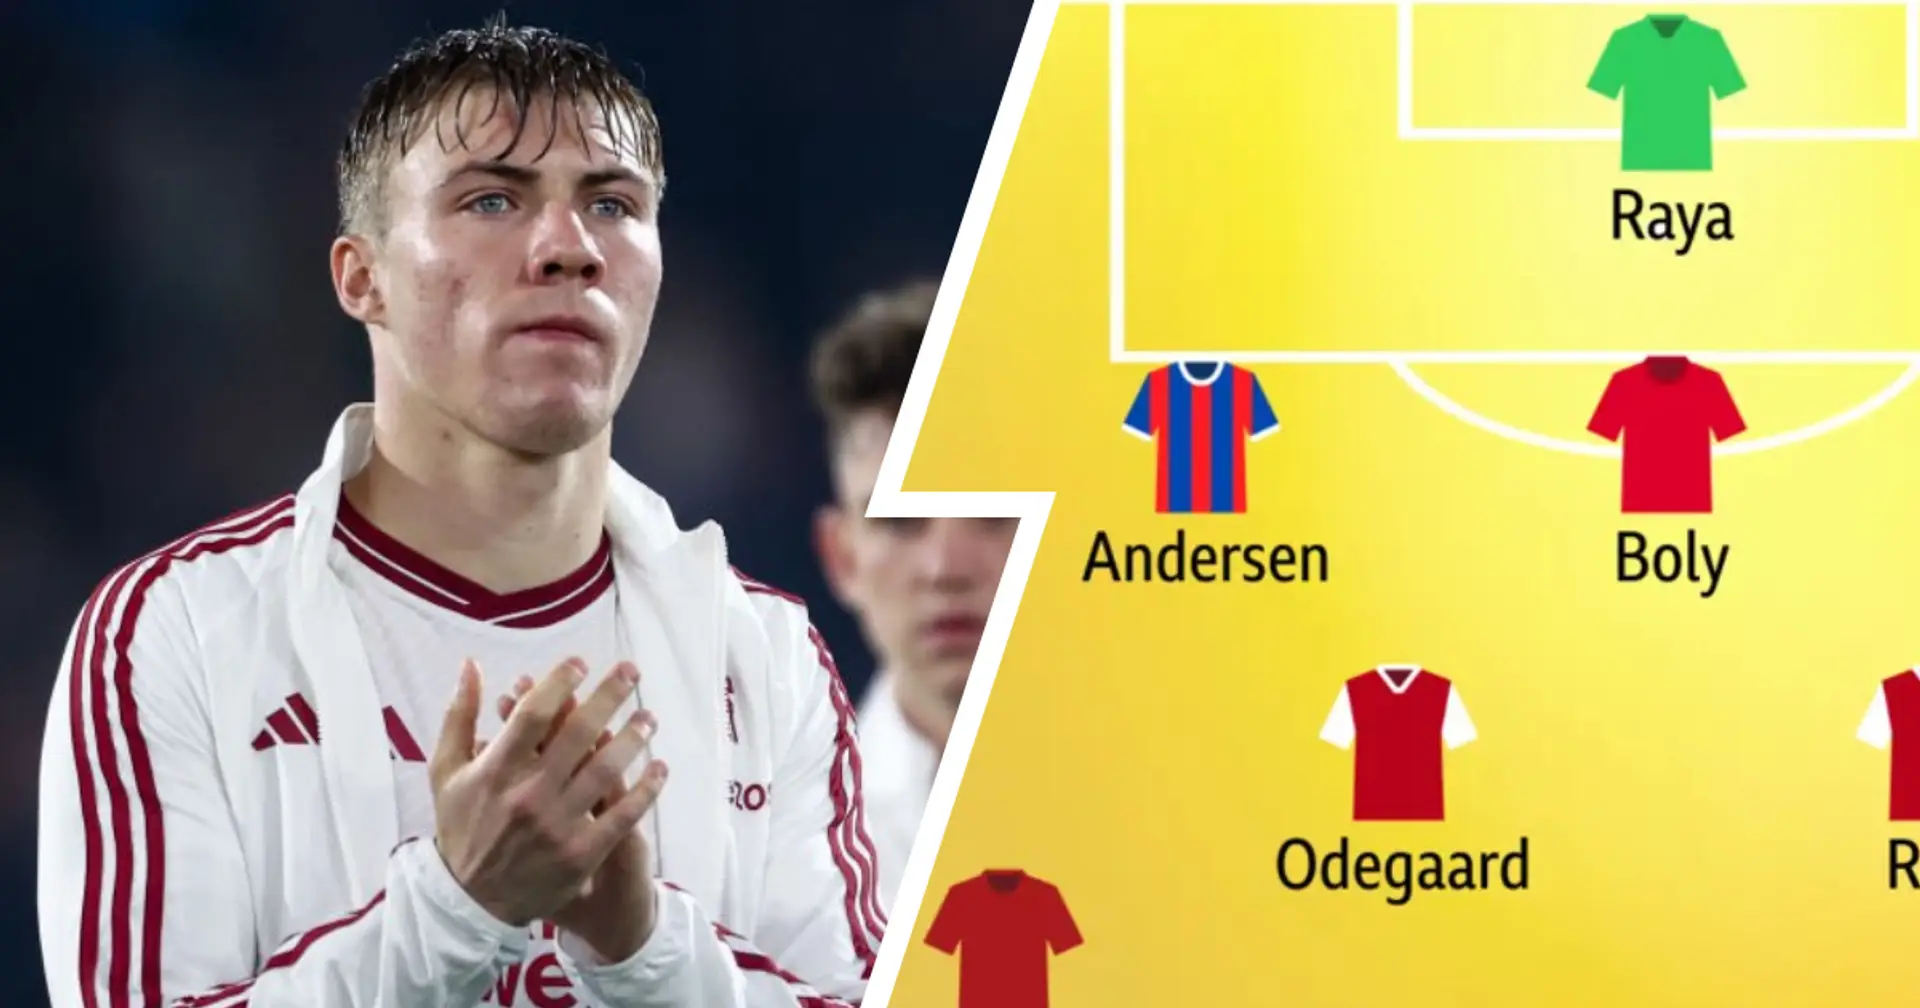 'Never gave Hojlund a kick all night': Palace defender makes BBC's Team of the Week after neutralising Rasmus